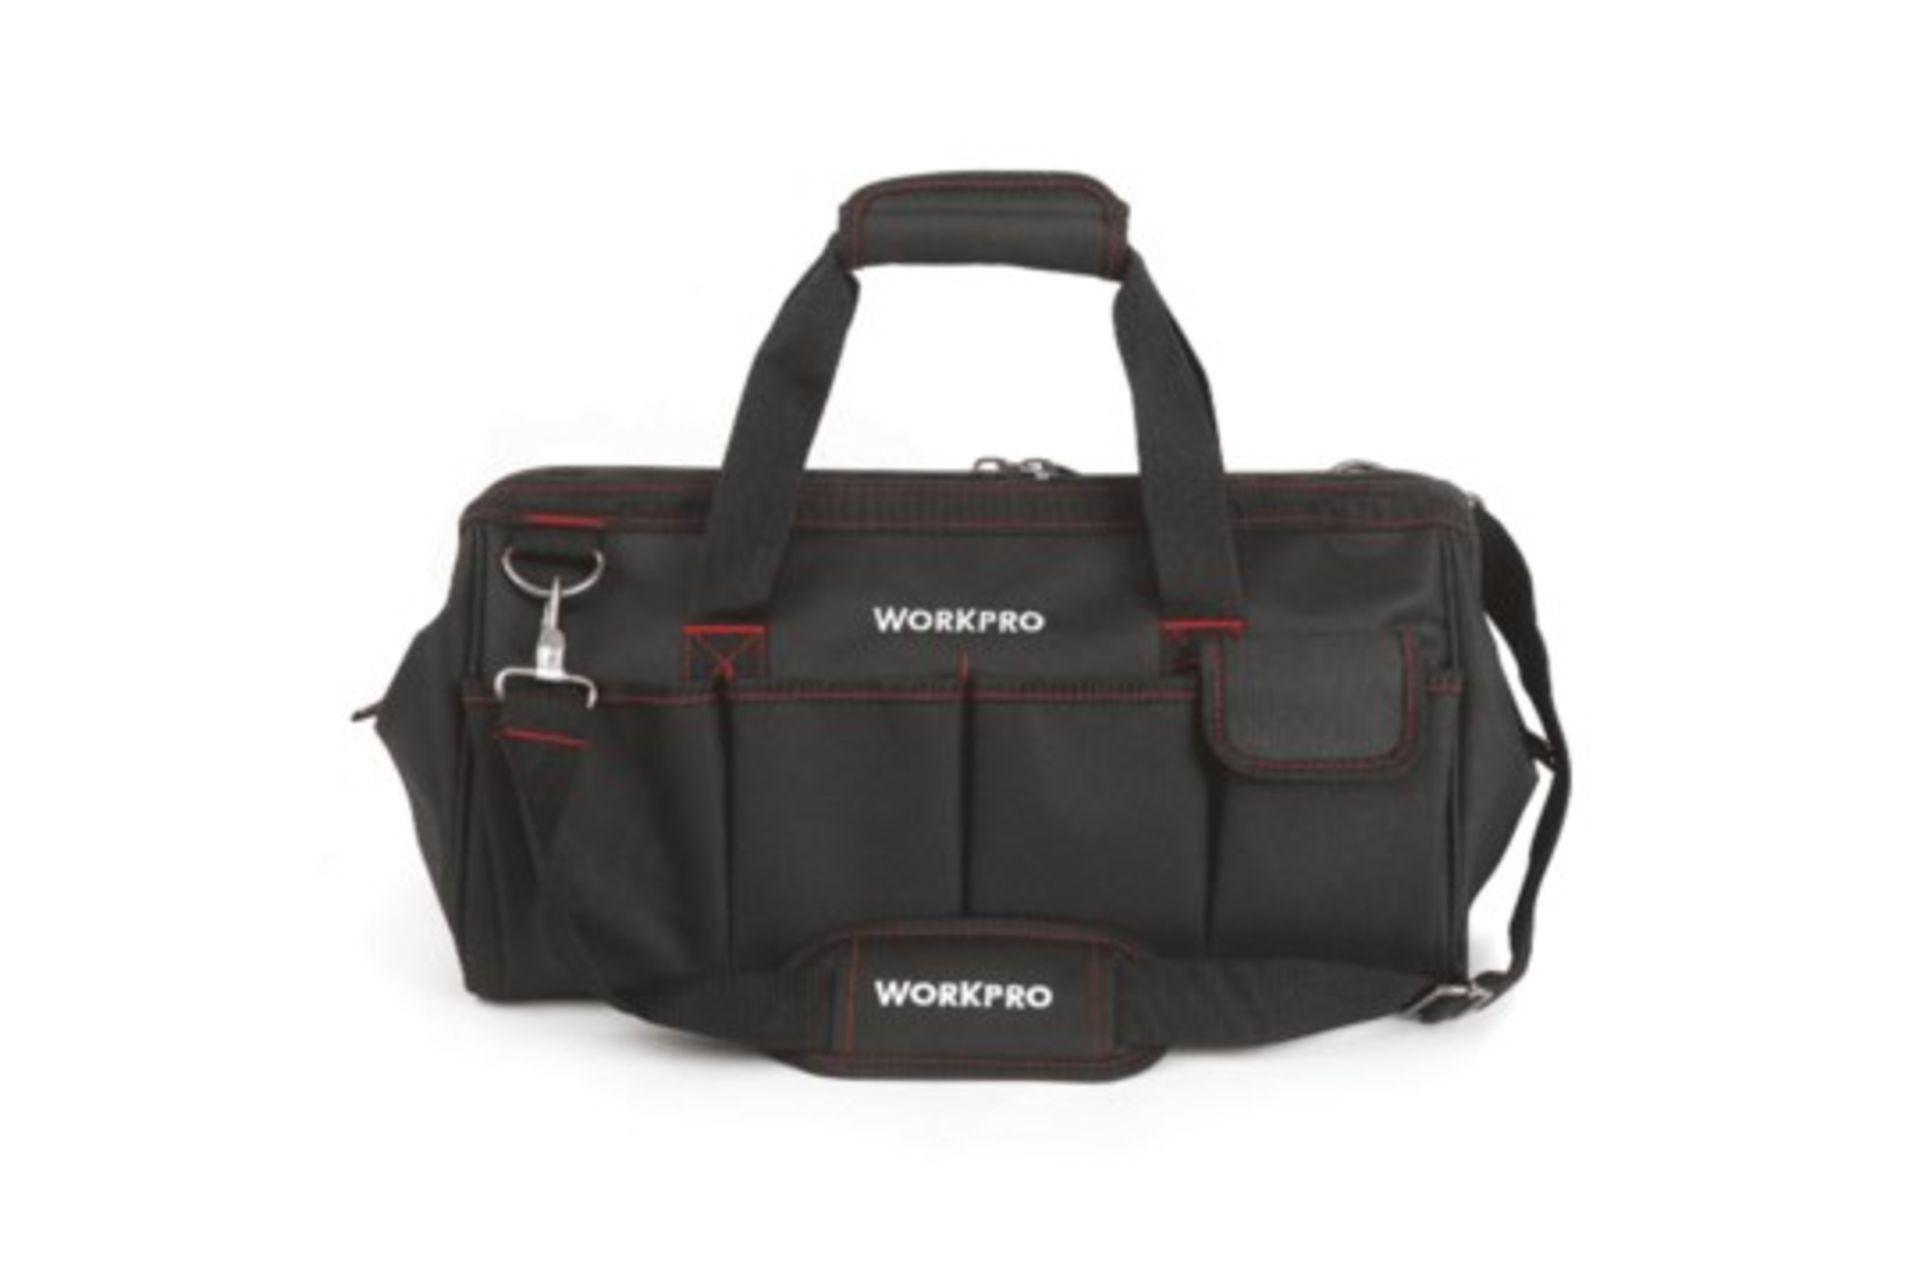 Workpro 18" Wide Mouth Tool Bags RRP £20 Each (W081023A)(Comes in 2 Boxes)